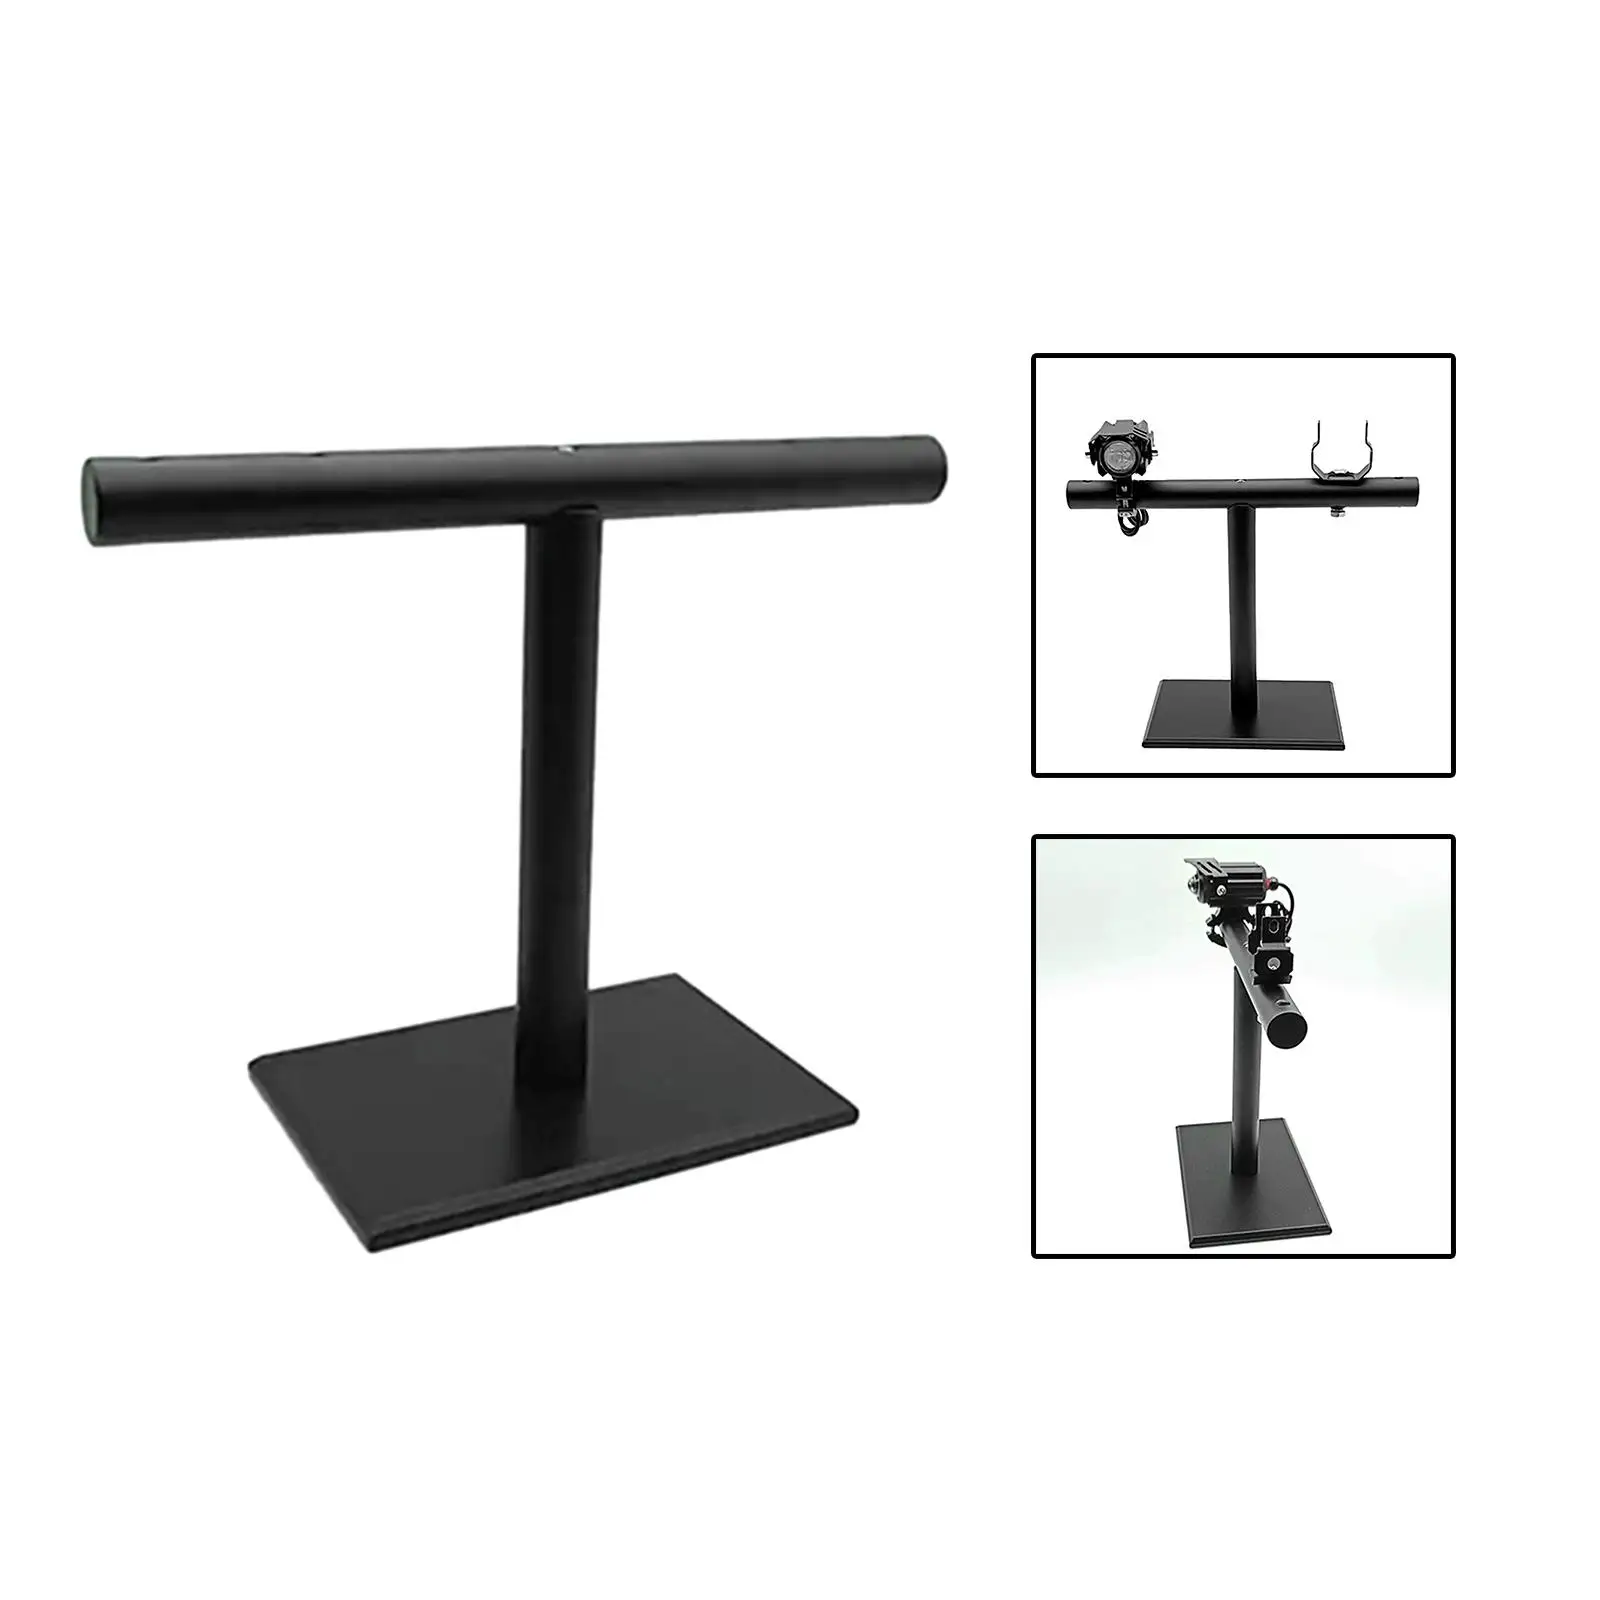 Desktop Car Light Display Stand Headset Display Stand Holder Durable T Shaped Metal Stand Holder Shelf Auto Light Display Stand